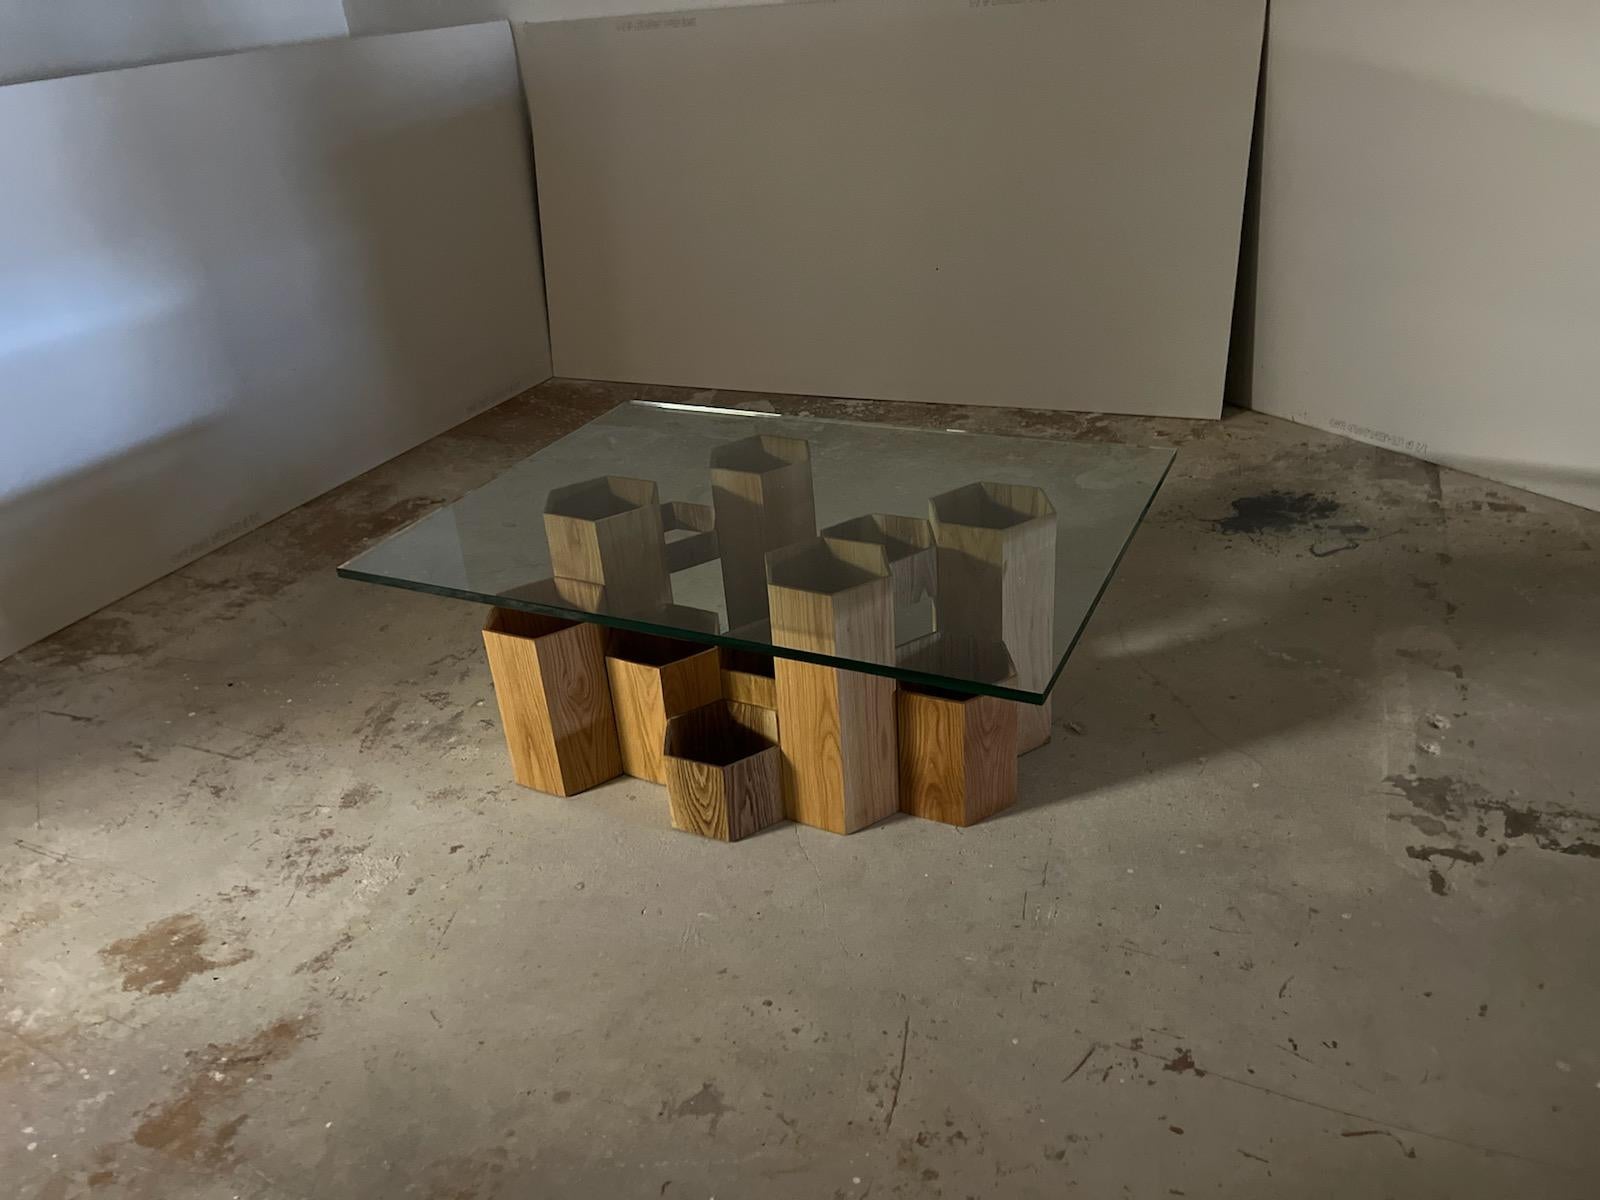 One of two studio apotroes tables inspired by the homes of bees. This solid wood coffee table features hexagonal cells of different heights at different heights to mimic the organic nature of a freshly cut piece of honeycomb. It is a contemporary